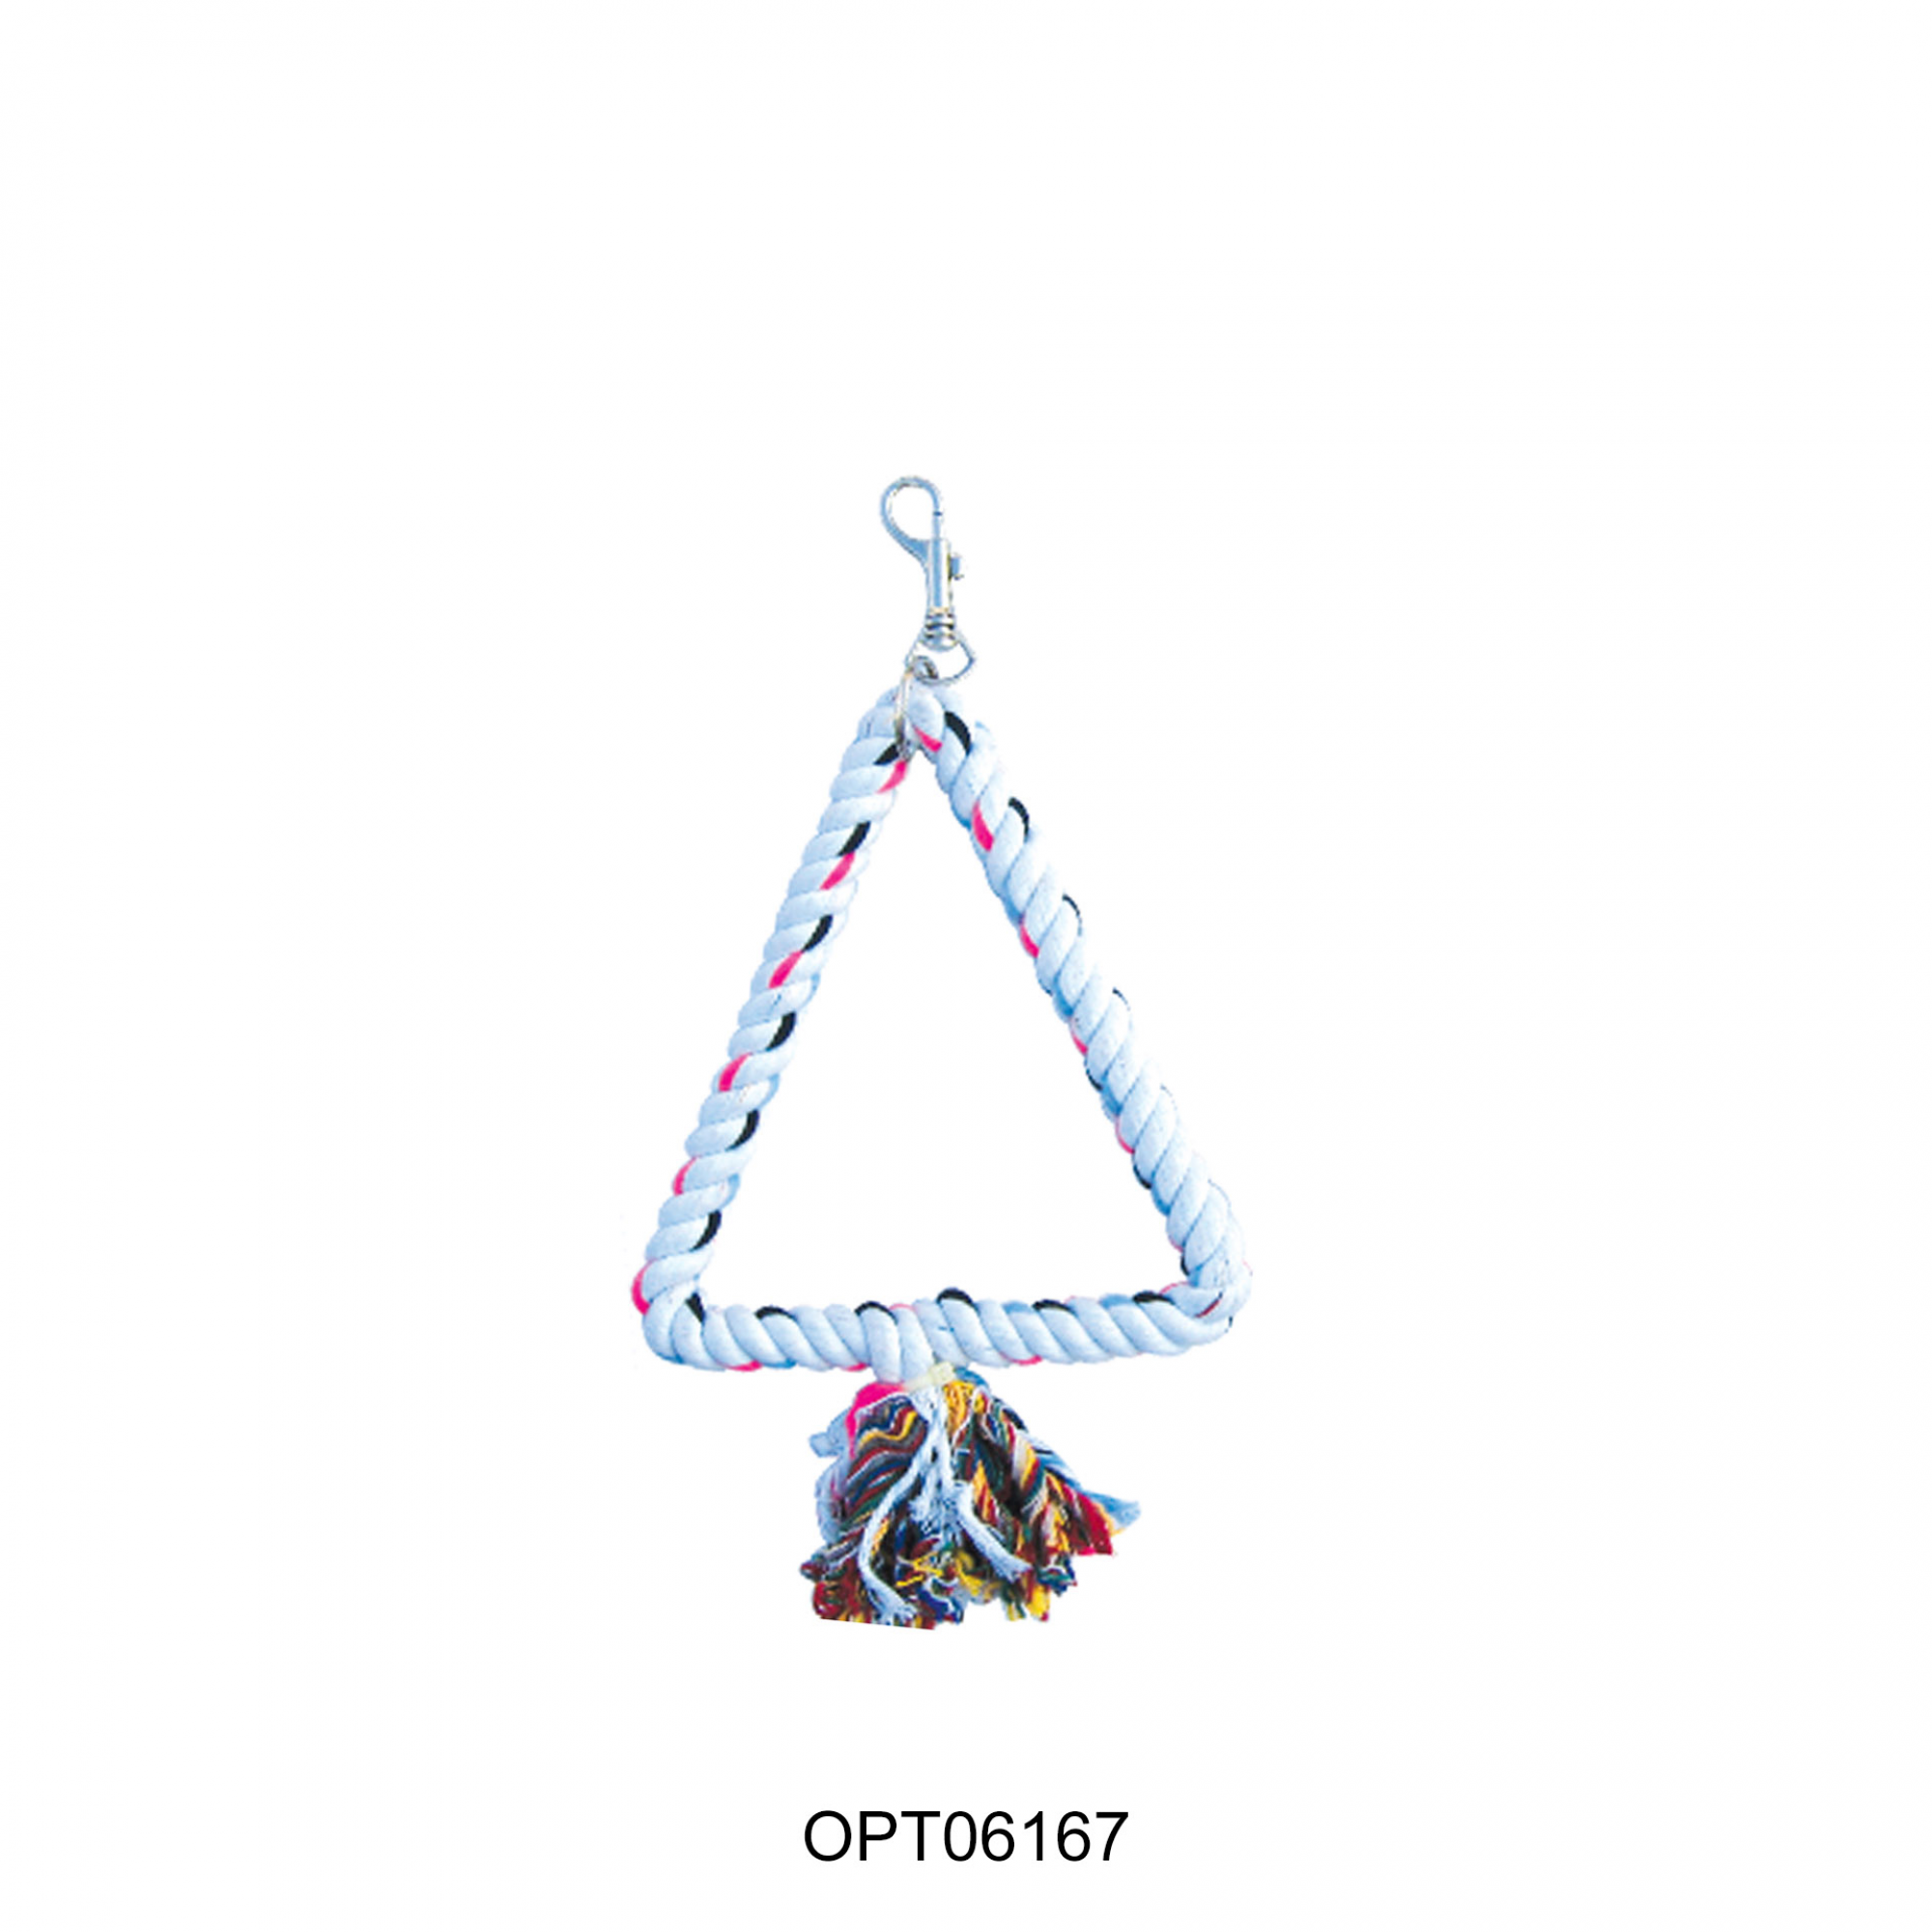 OPSP - 6167 - Triangle Shaped Rope Bird Toy 11"